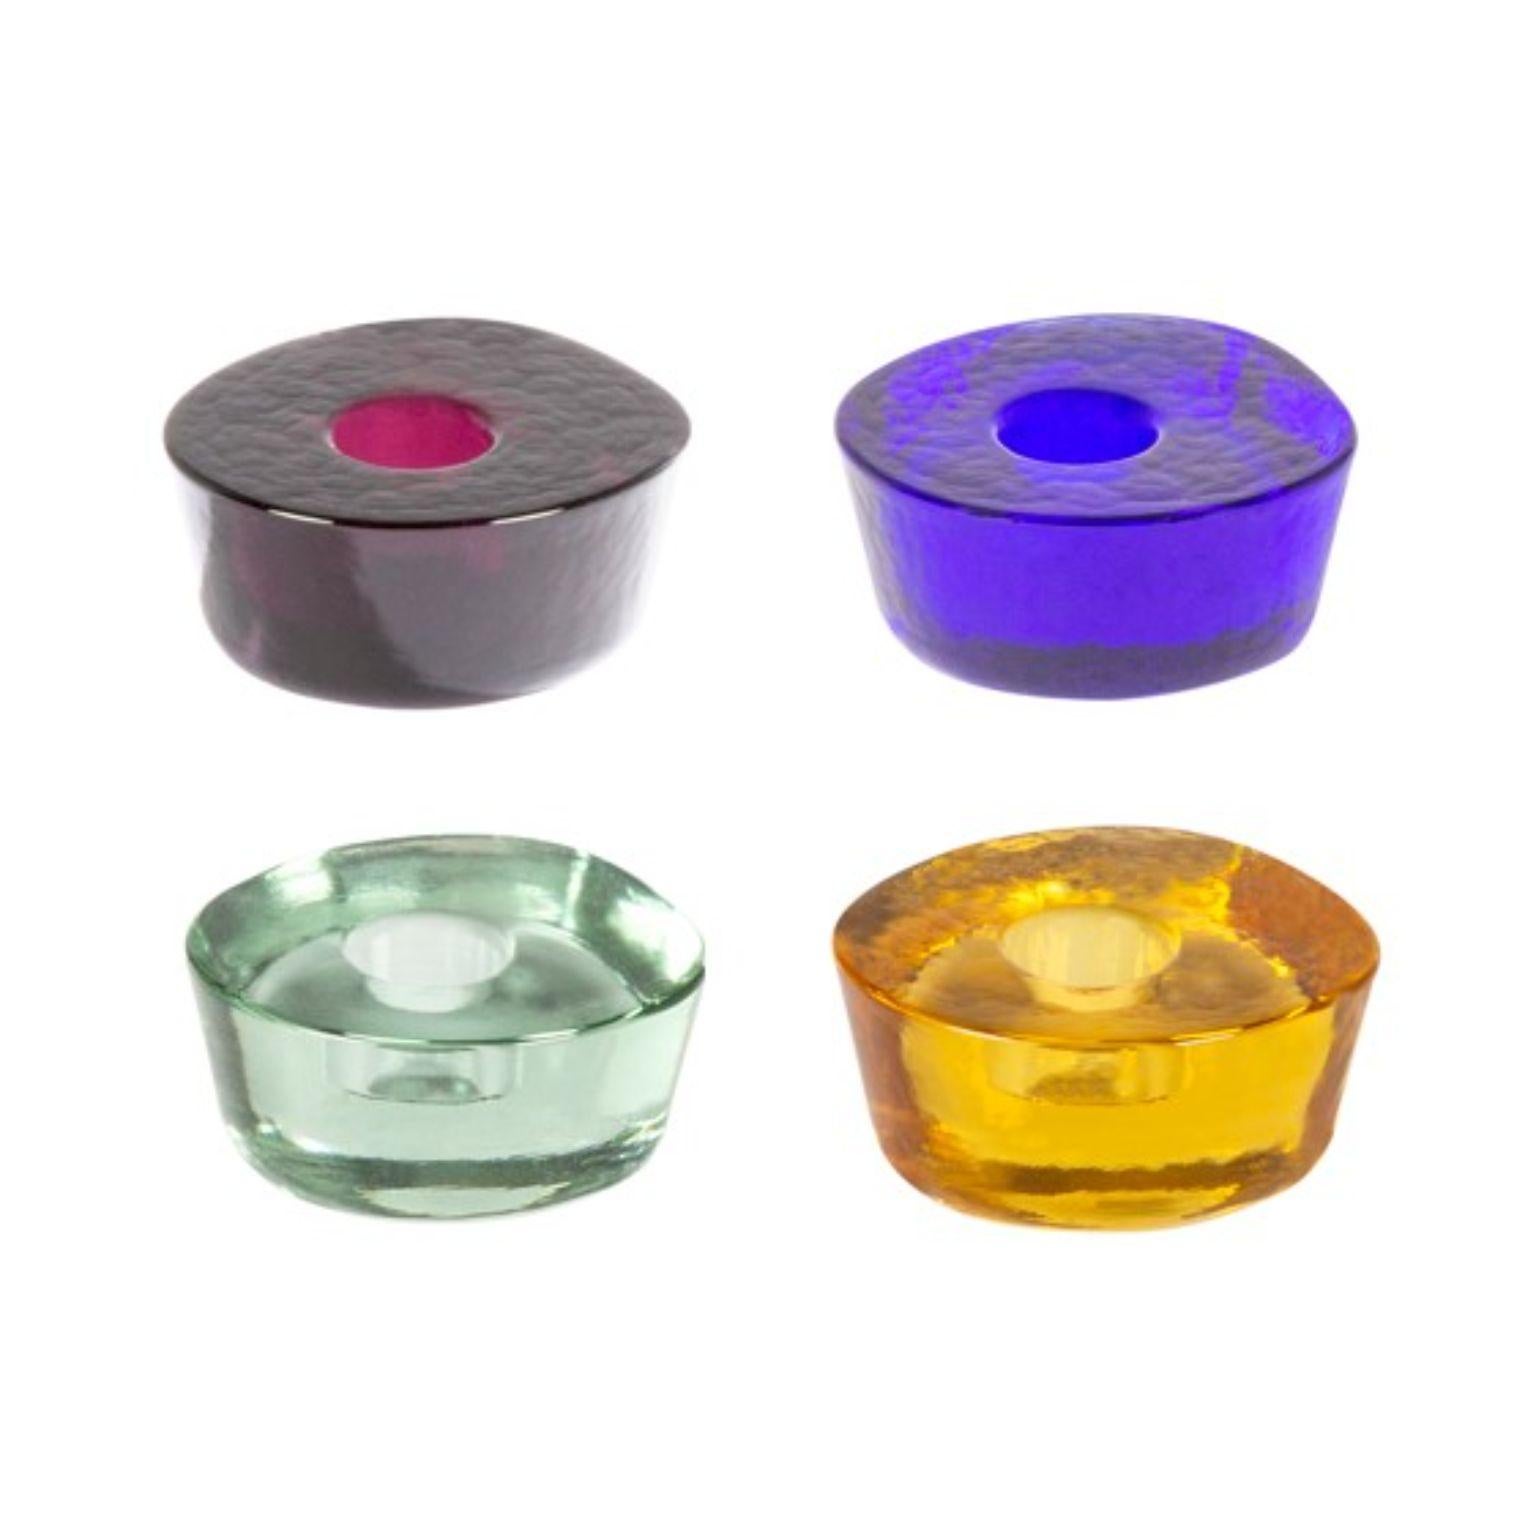 Set of 4 Atoll small candle holders by Pulpo
Dimensions: D8 x W7.5 x H4 cm.
Materials: casted glass.

Also available in different colours. 

These simple forms refer to the free-form nature of volcanic islands – much like the changing of glass